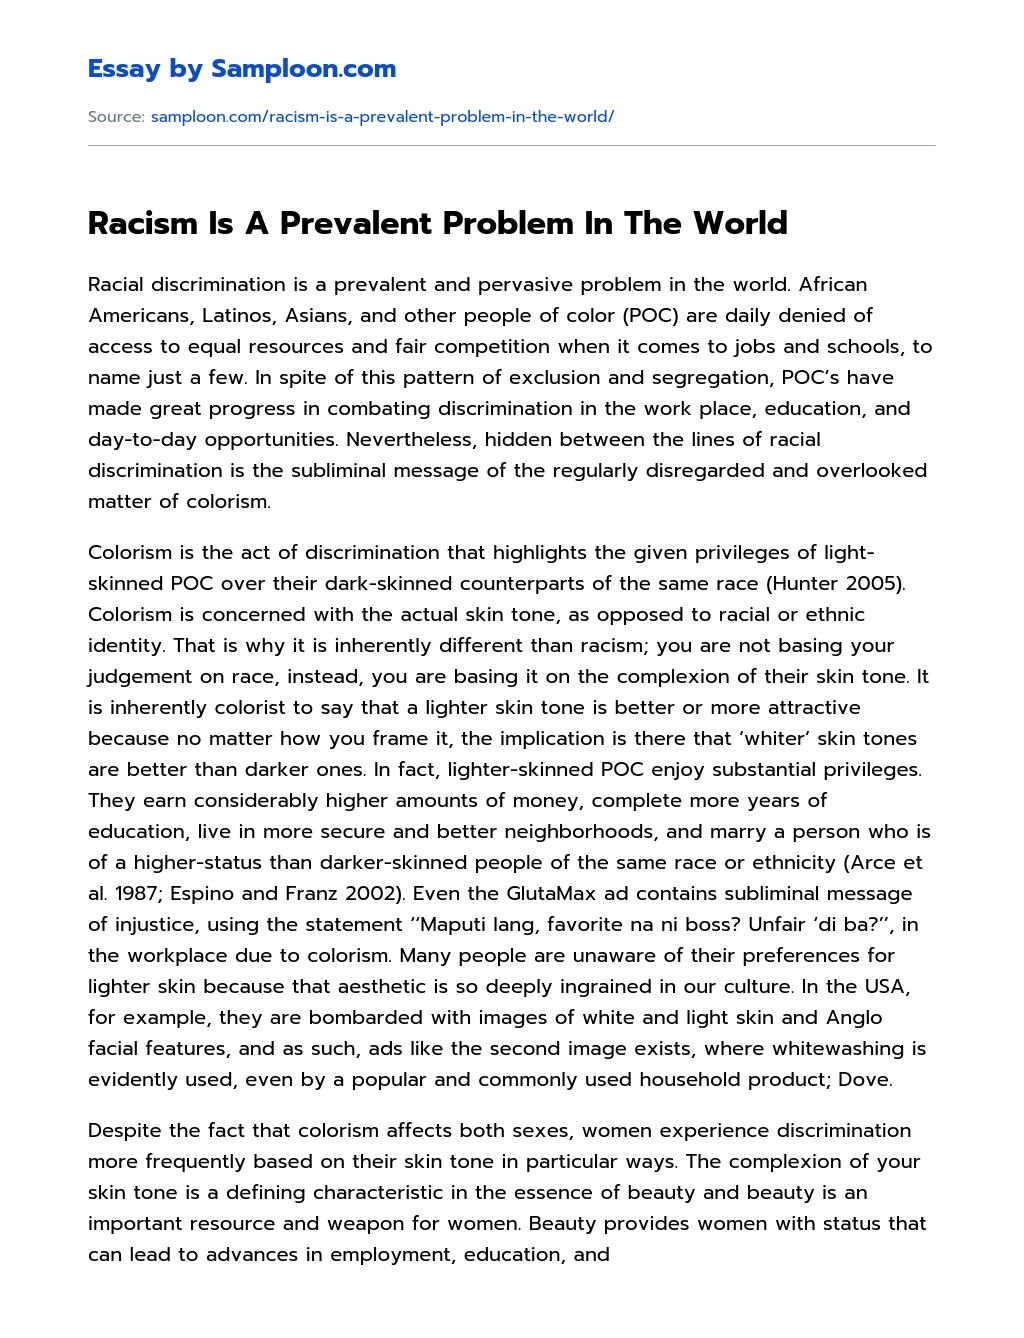 Racism Is A Prevalent  Problem In The World essay